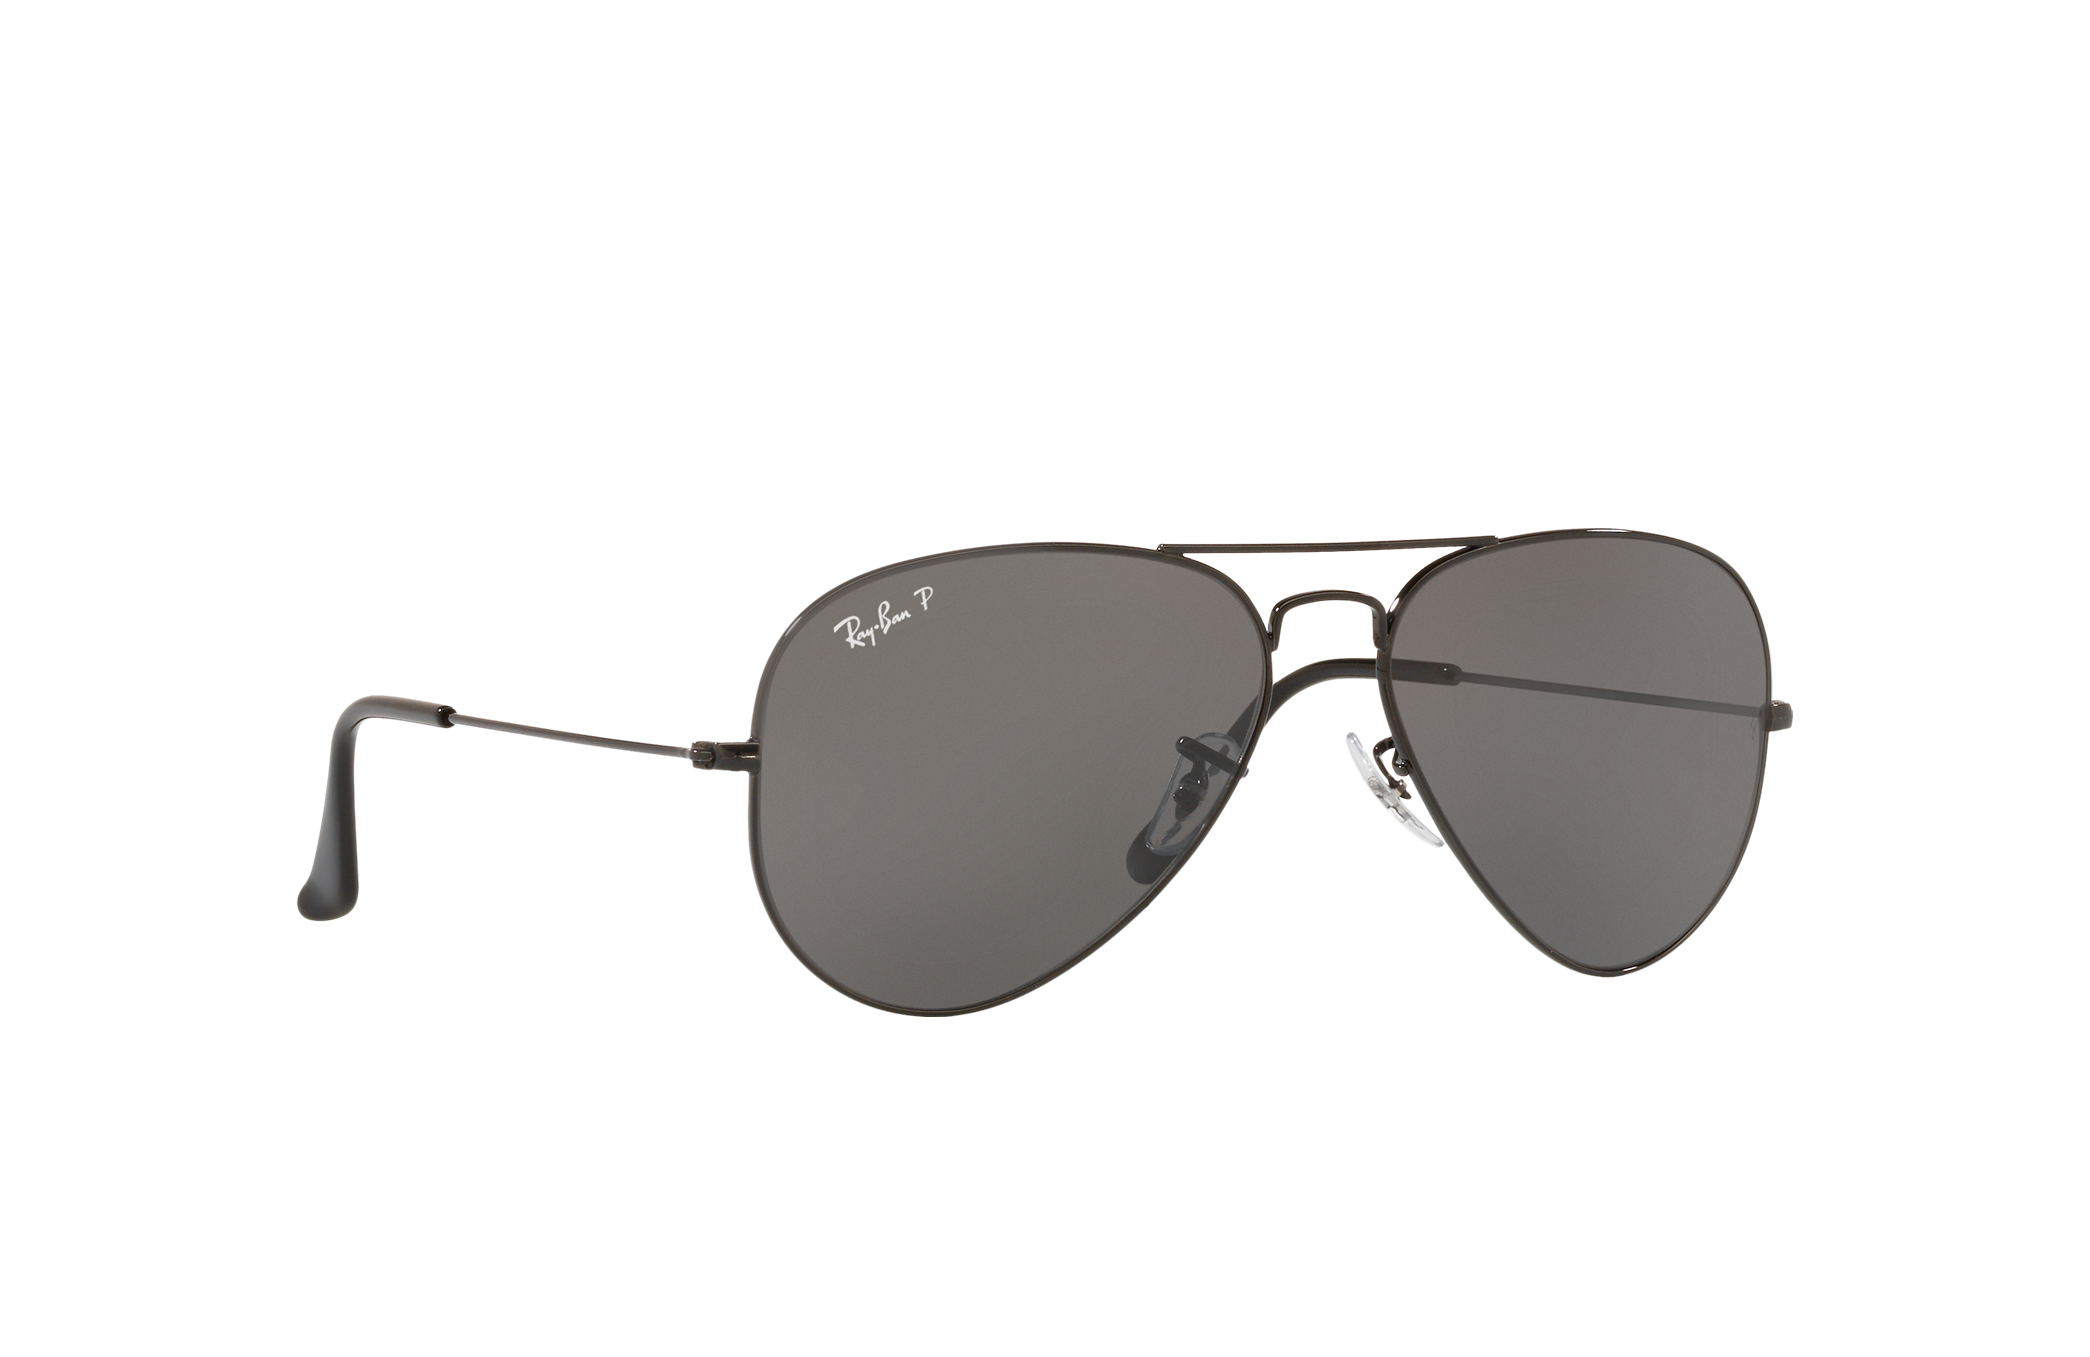 AVIATOR TOTAL BLACK Sunglasses in Black and Black - RB3025 | Ray-Ban® US